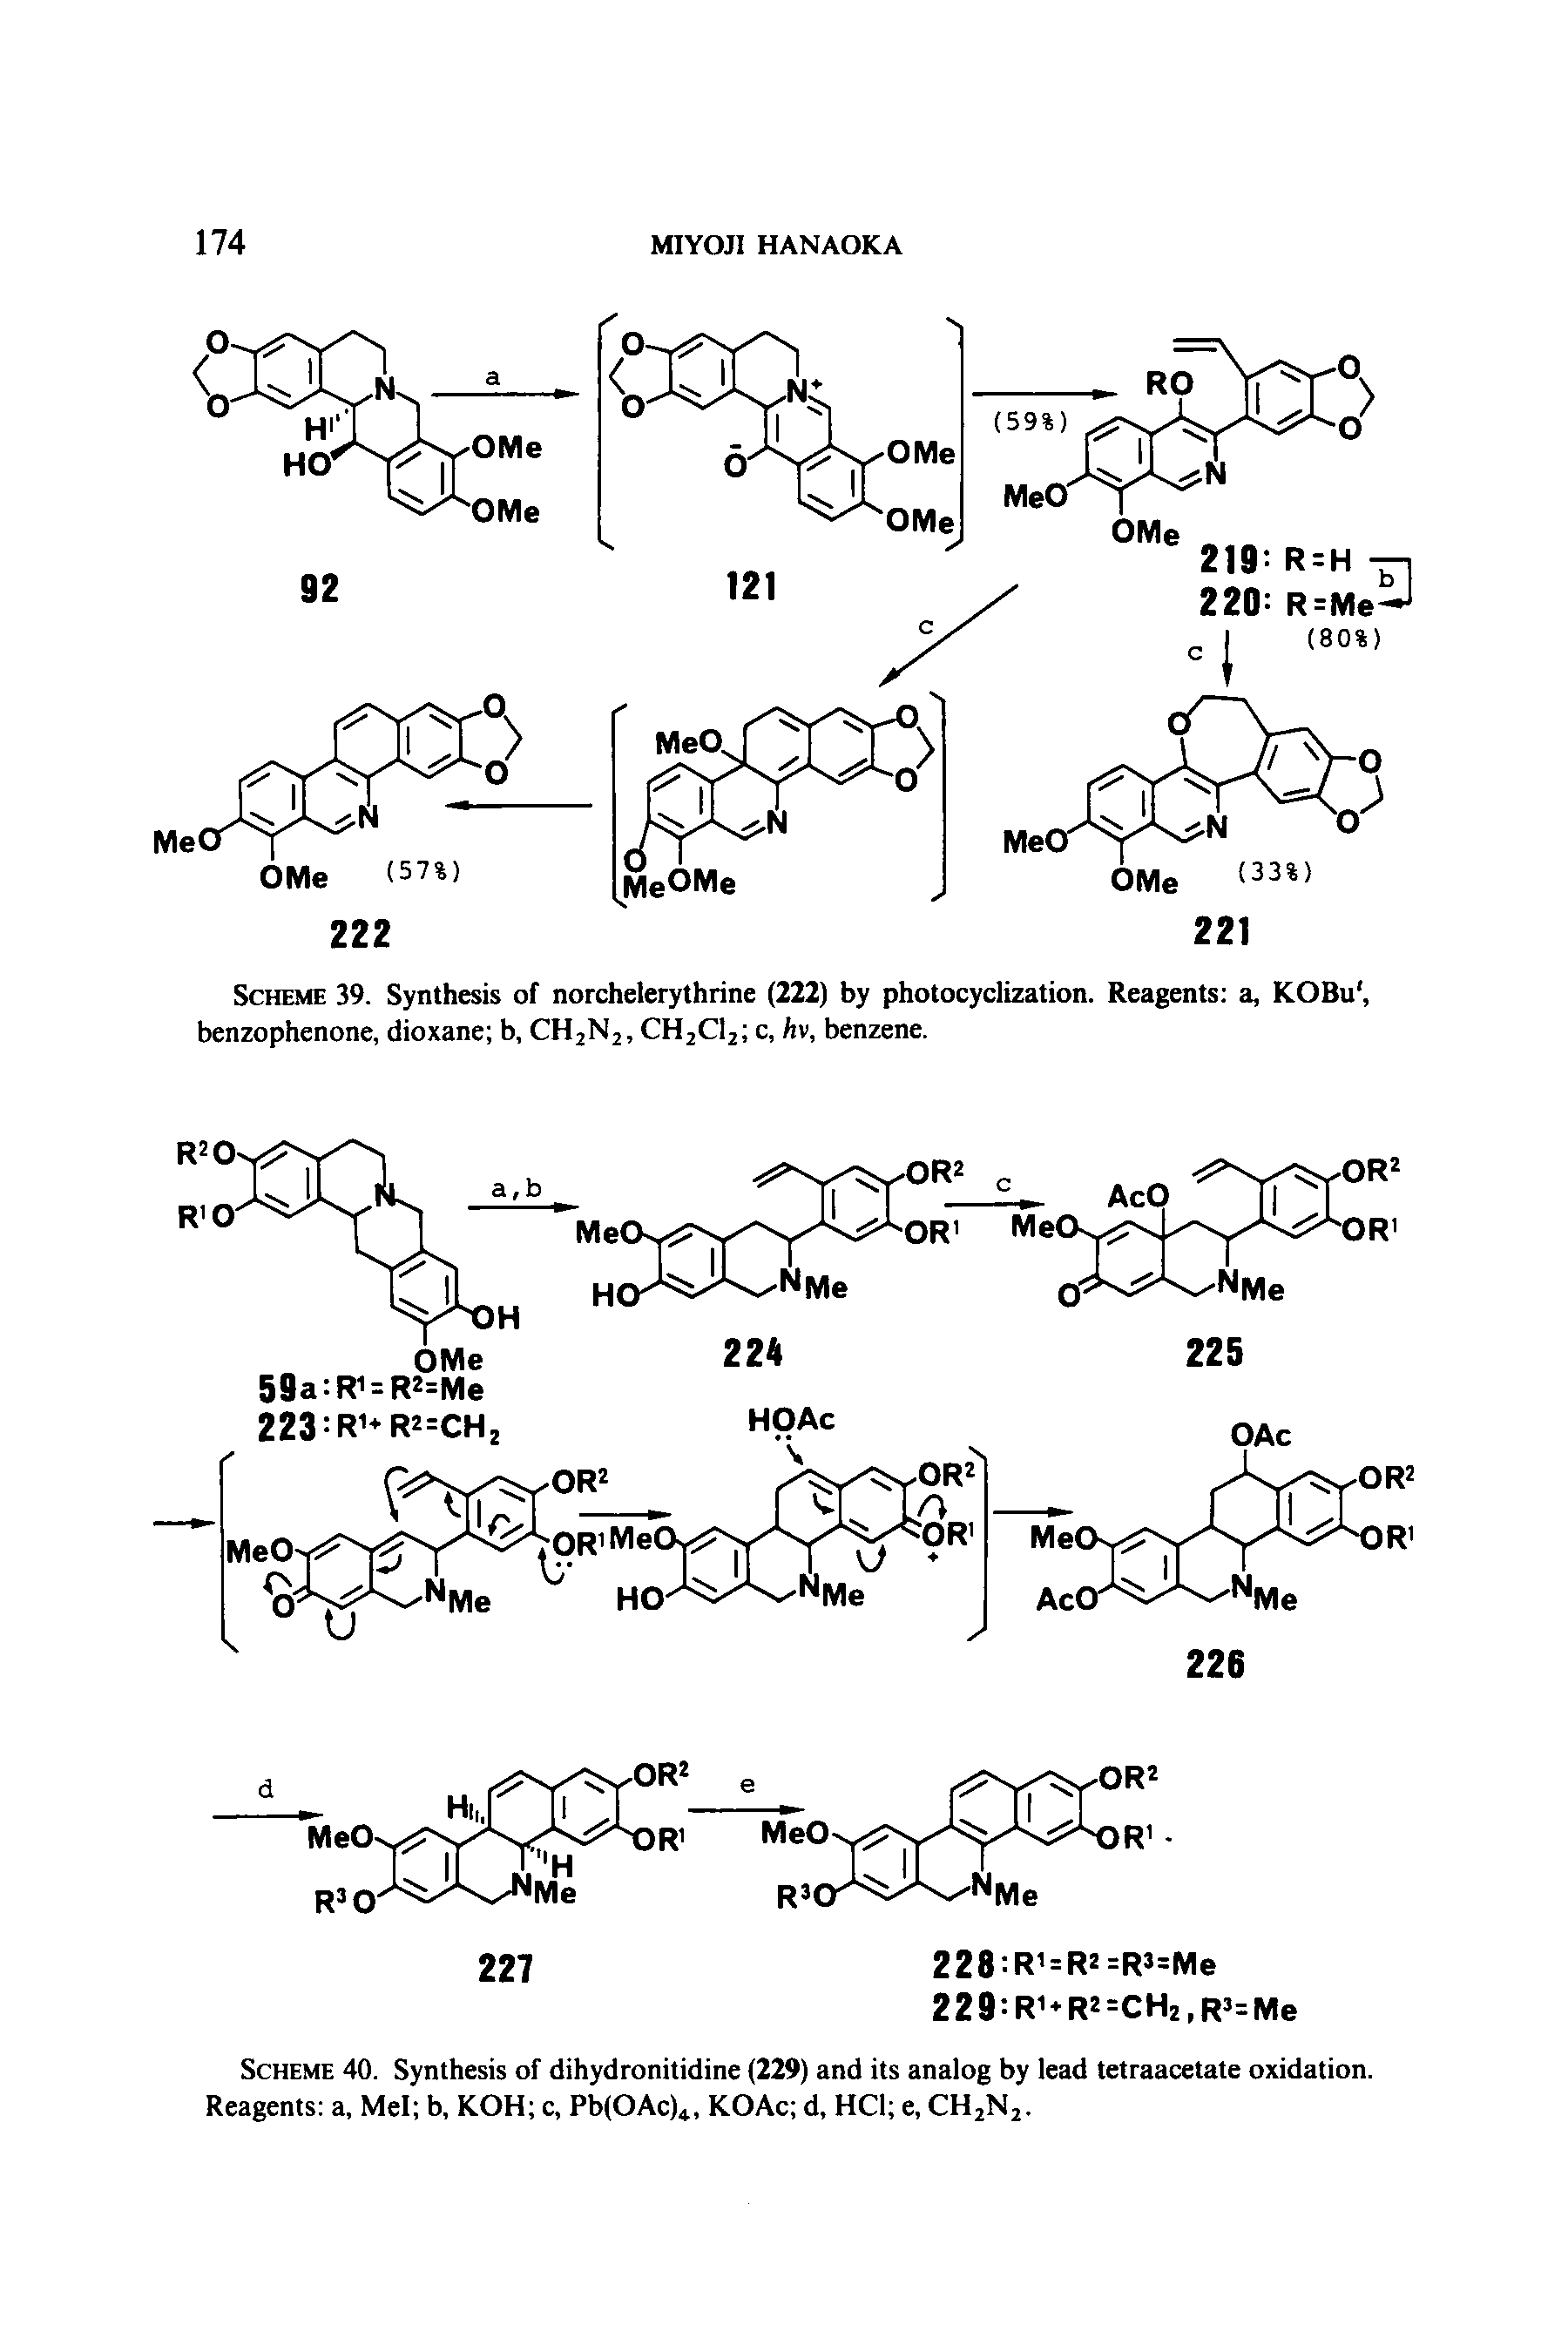 Scheme 40. Synthesis of dihydronitidine (229) and its analog by lead tetraacetate oxidation. Reagents a, Mel b, KOH c, Pb(OAc)4, KOAc d, HCl e, CH2N2.